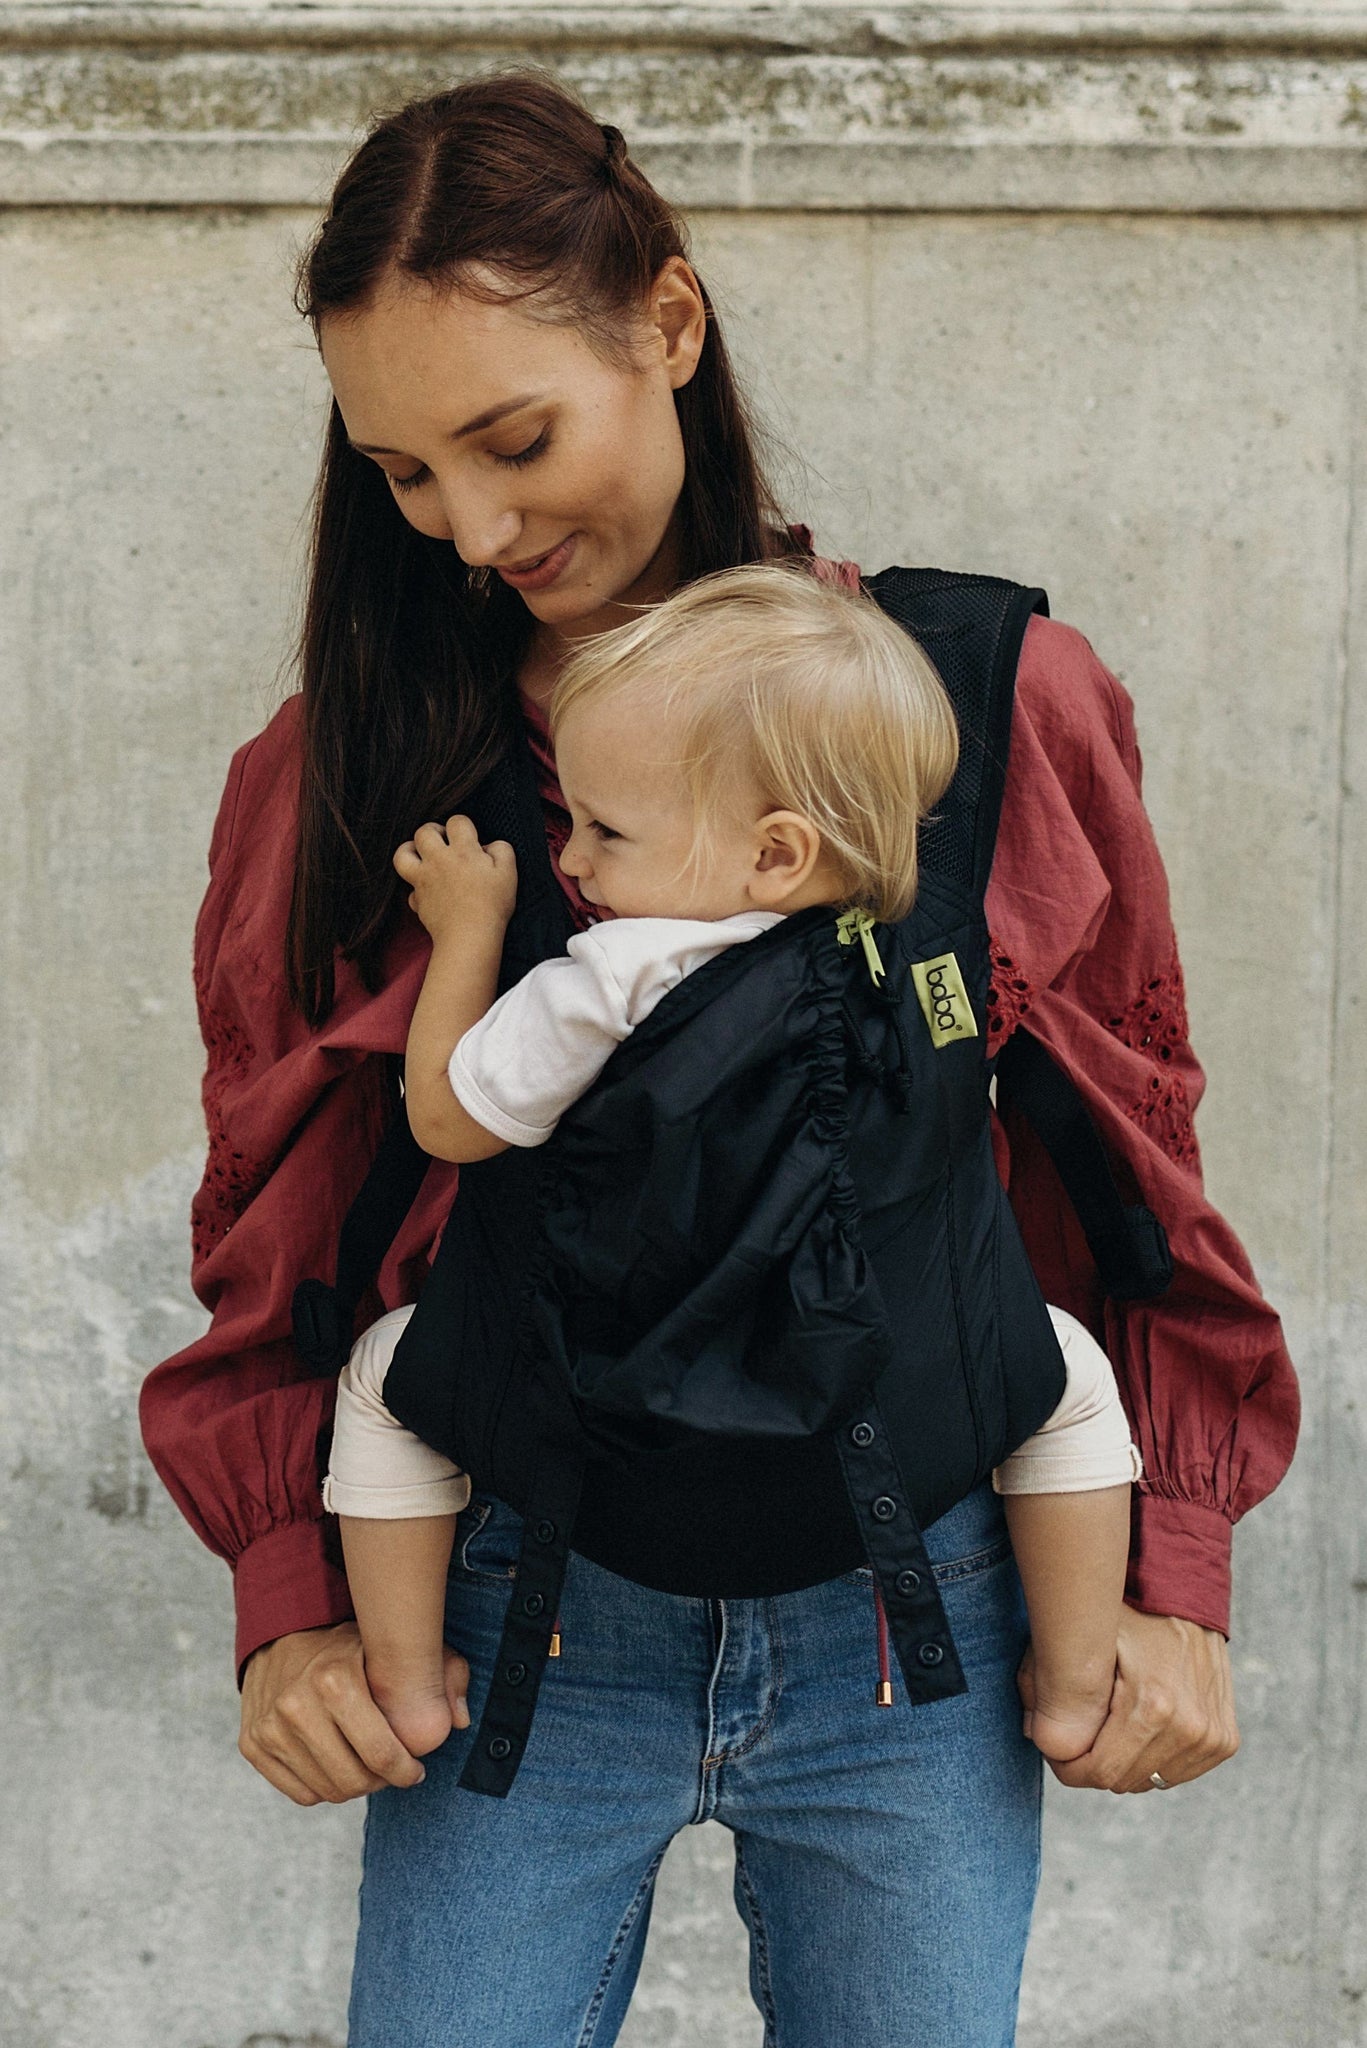 Boba Bliss Baby Carrier in Black – Boba Inc.